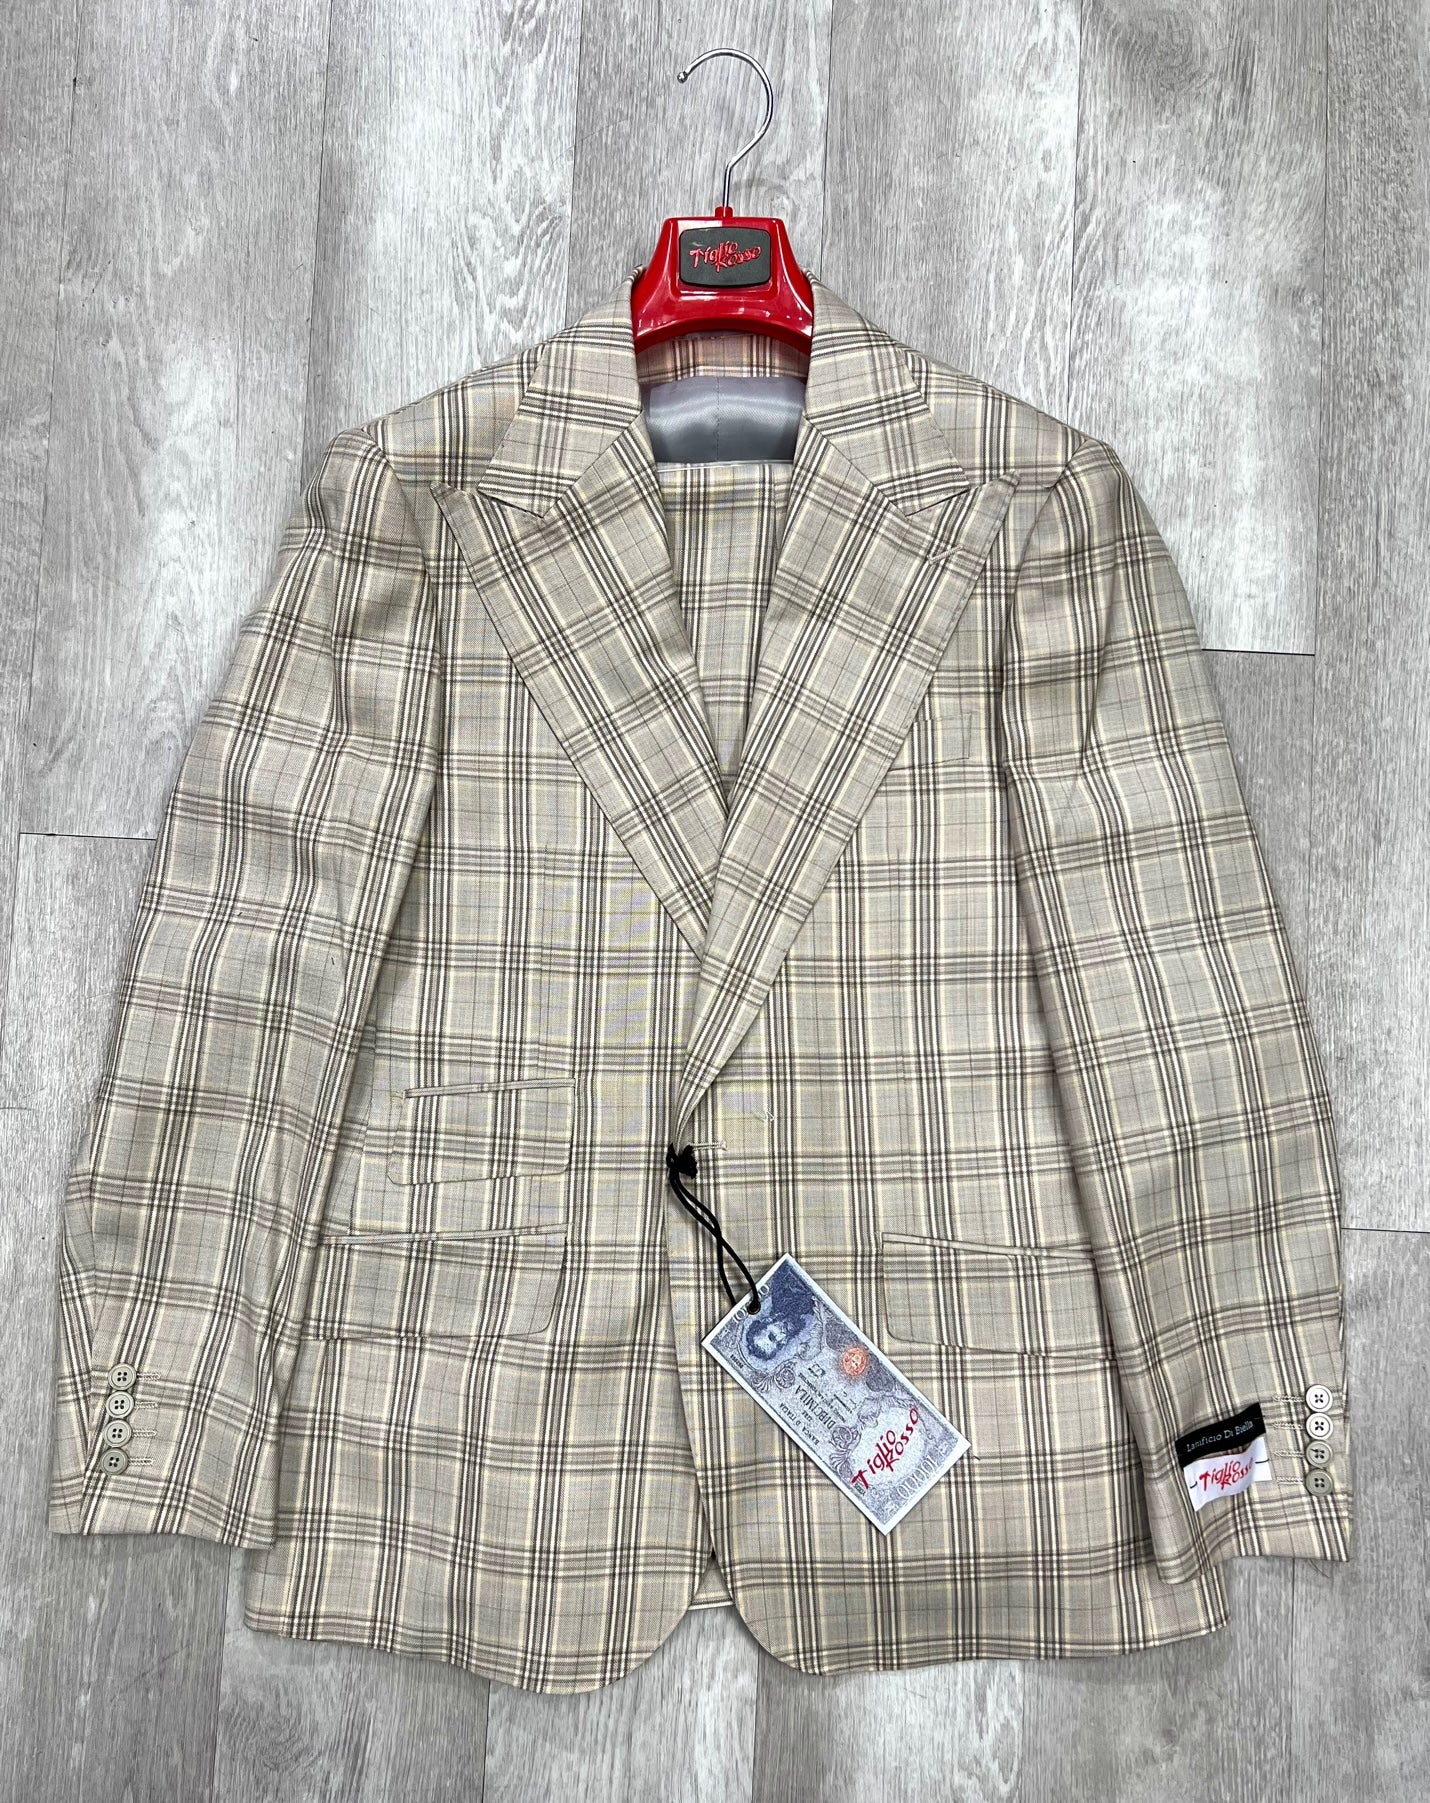 Tiglio Rosso Orvietto Light Brown Plaid Wool Suit/Vest TL3119 (Single Pleated Regular Fit) (SIZE 52R ONLY)